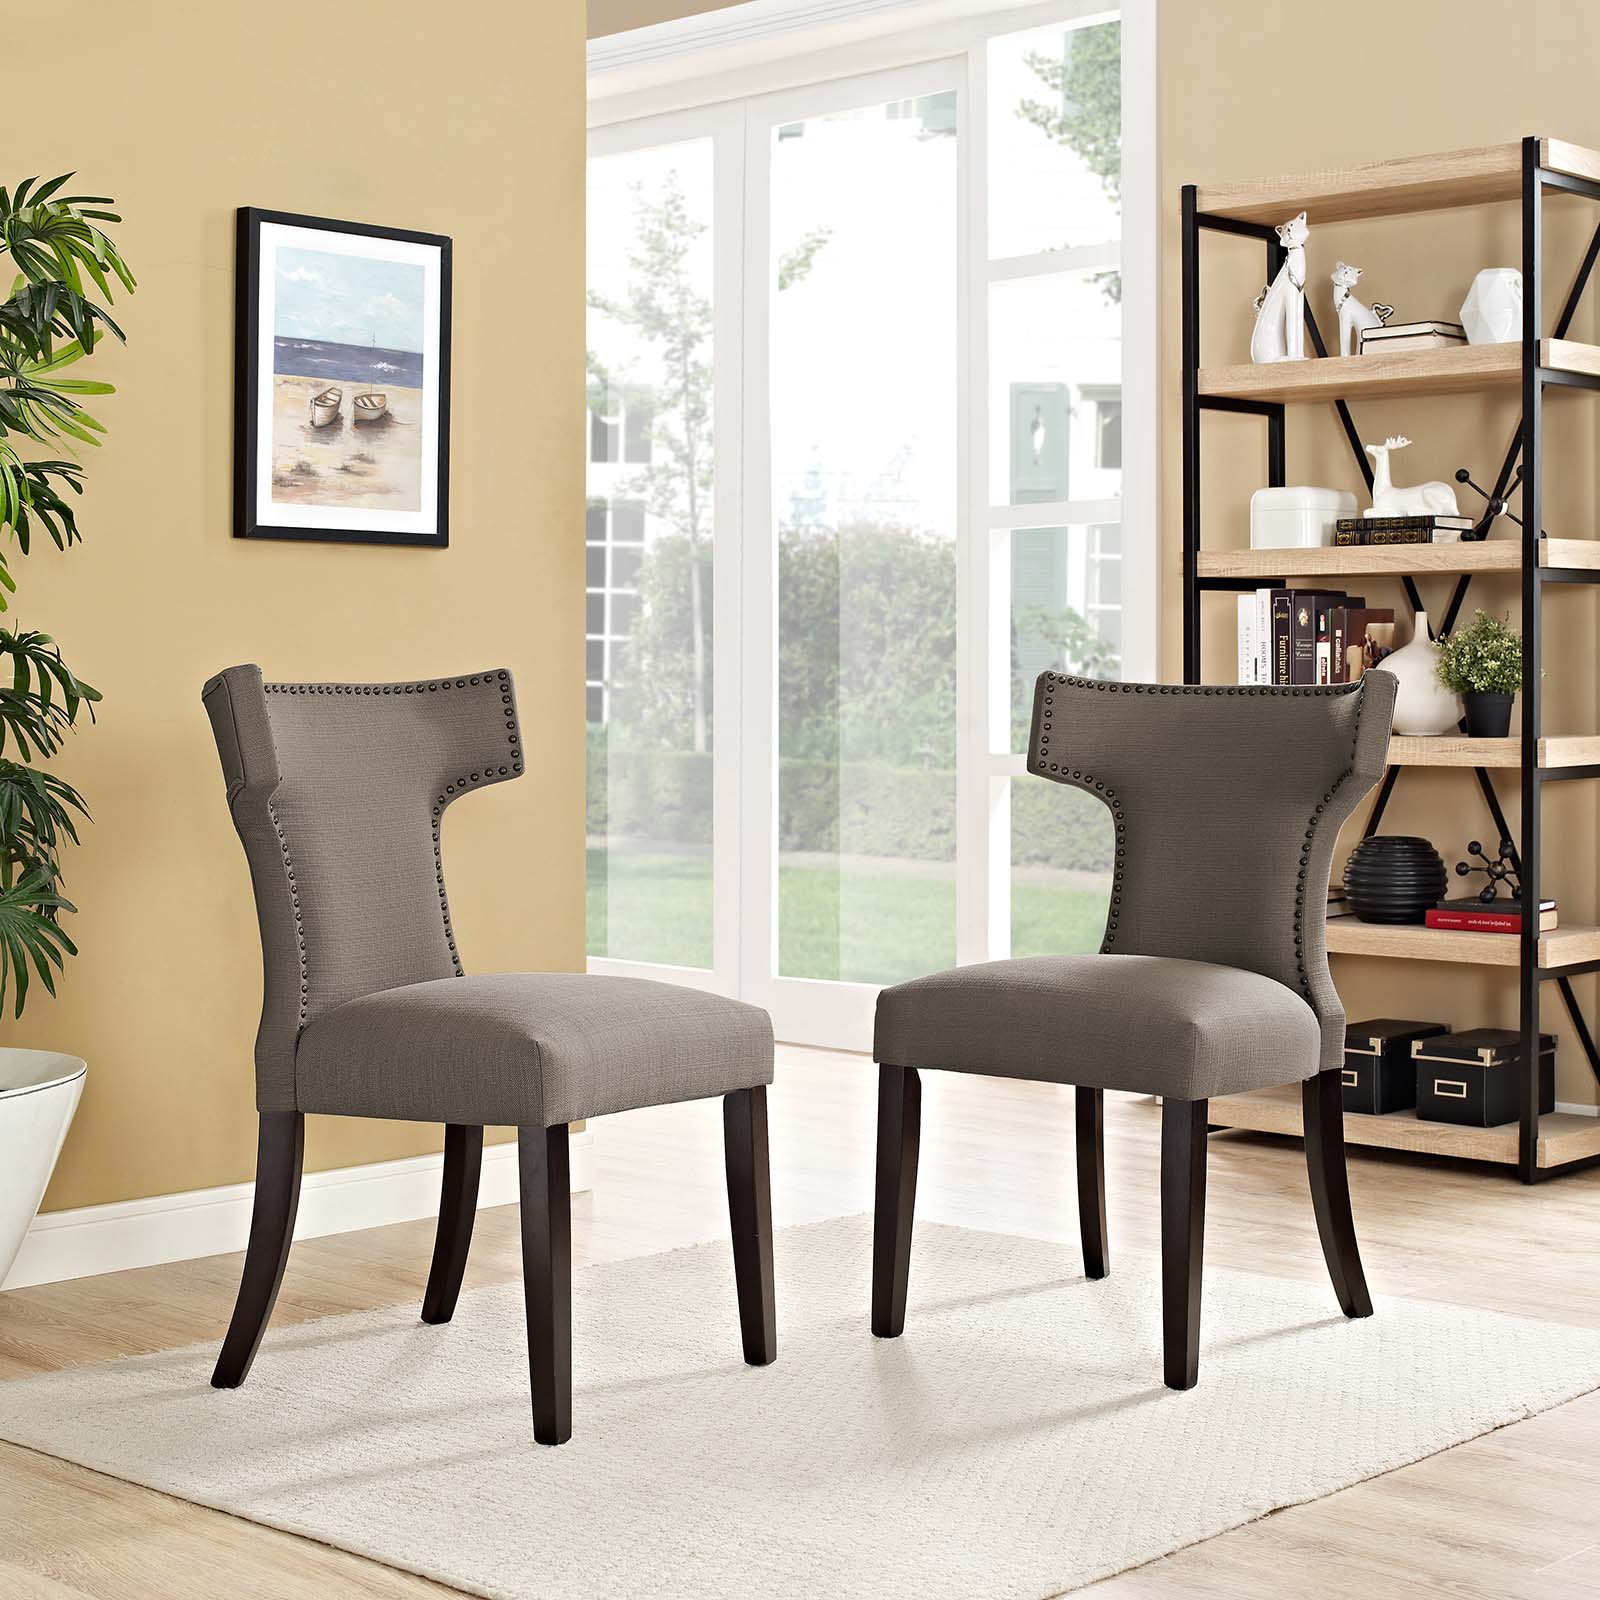 Modway Dining Chairs - Curve Dining Side Chair Fabric ( Set of 2 ) Granite